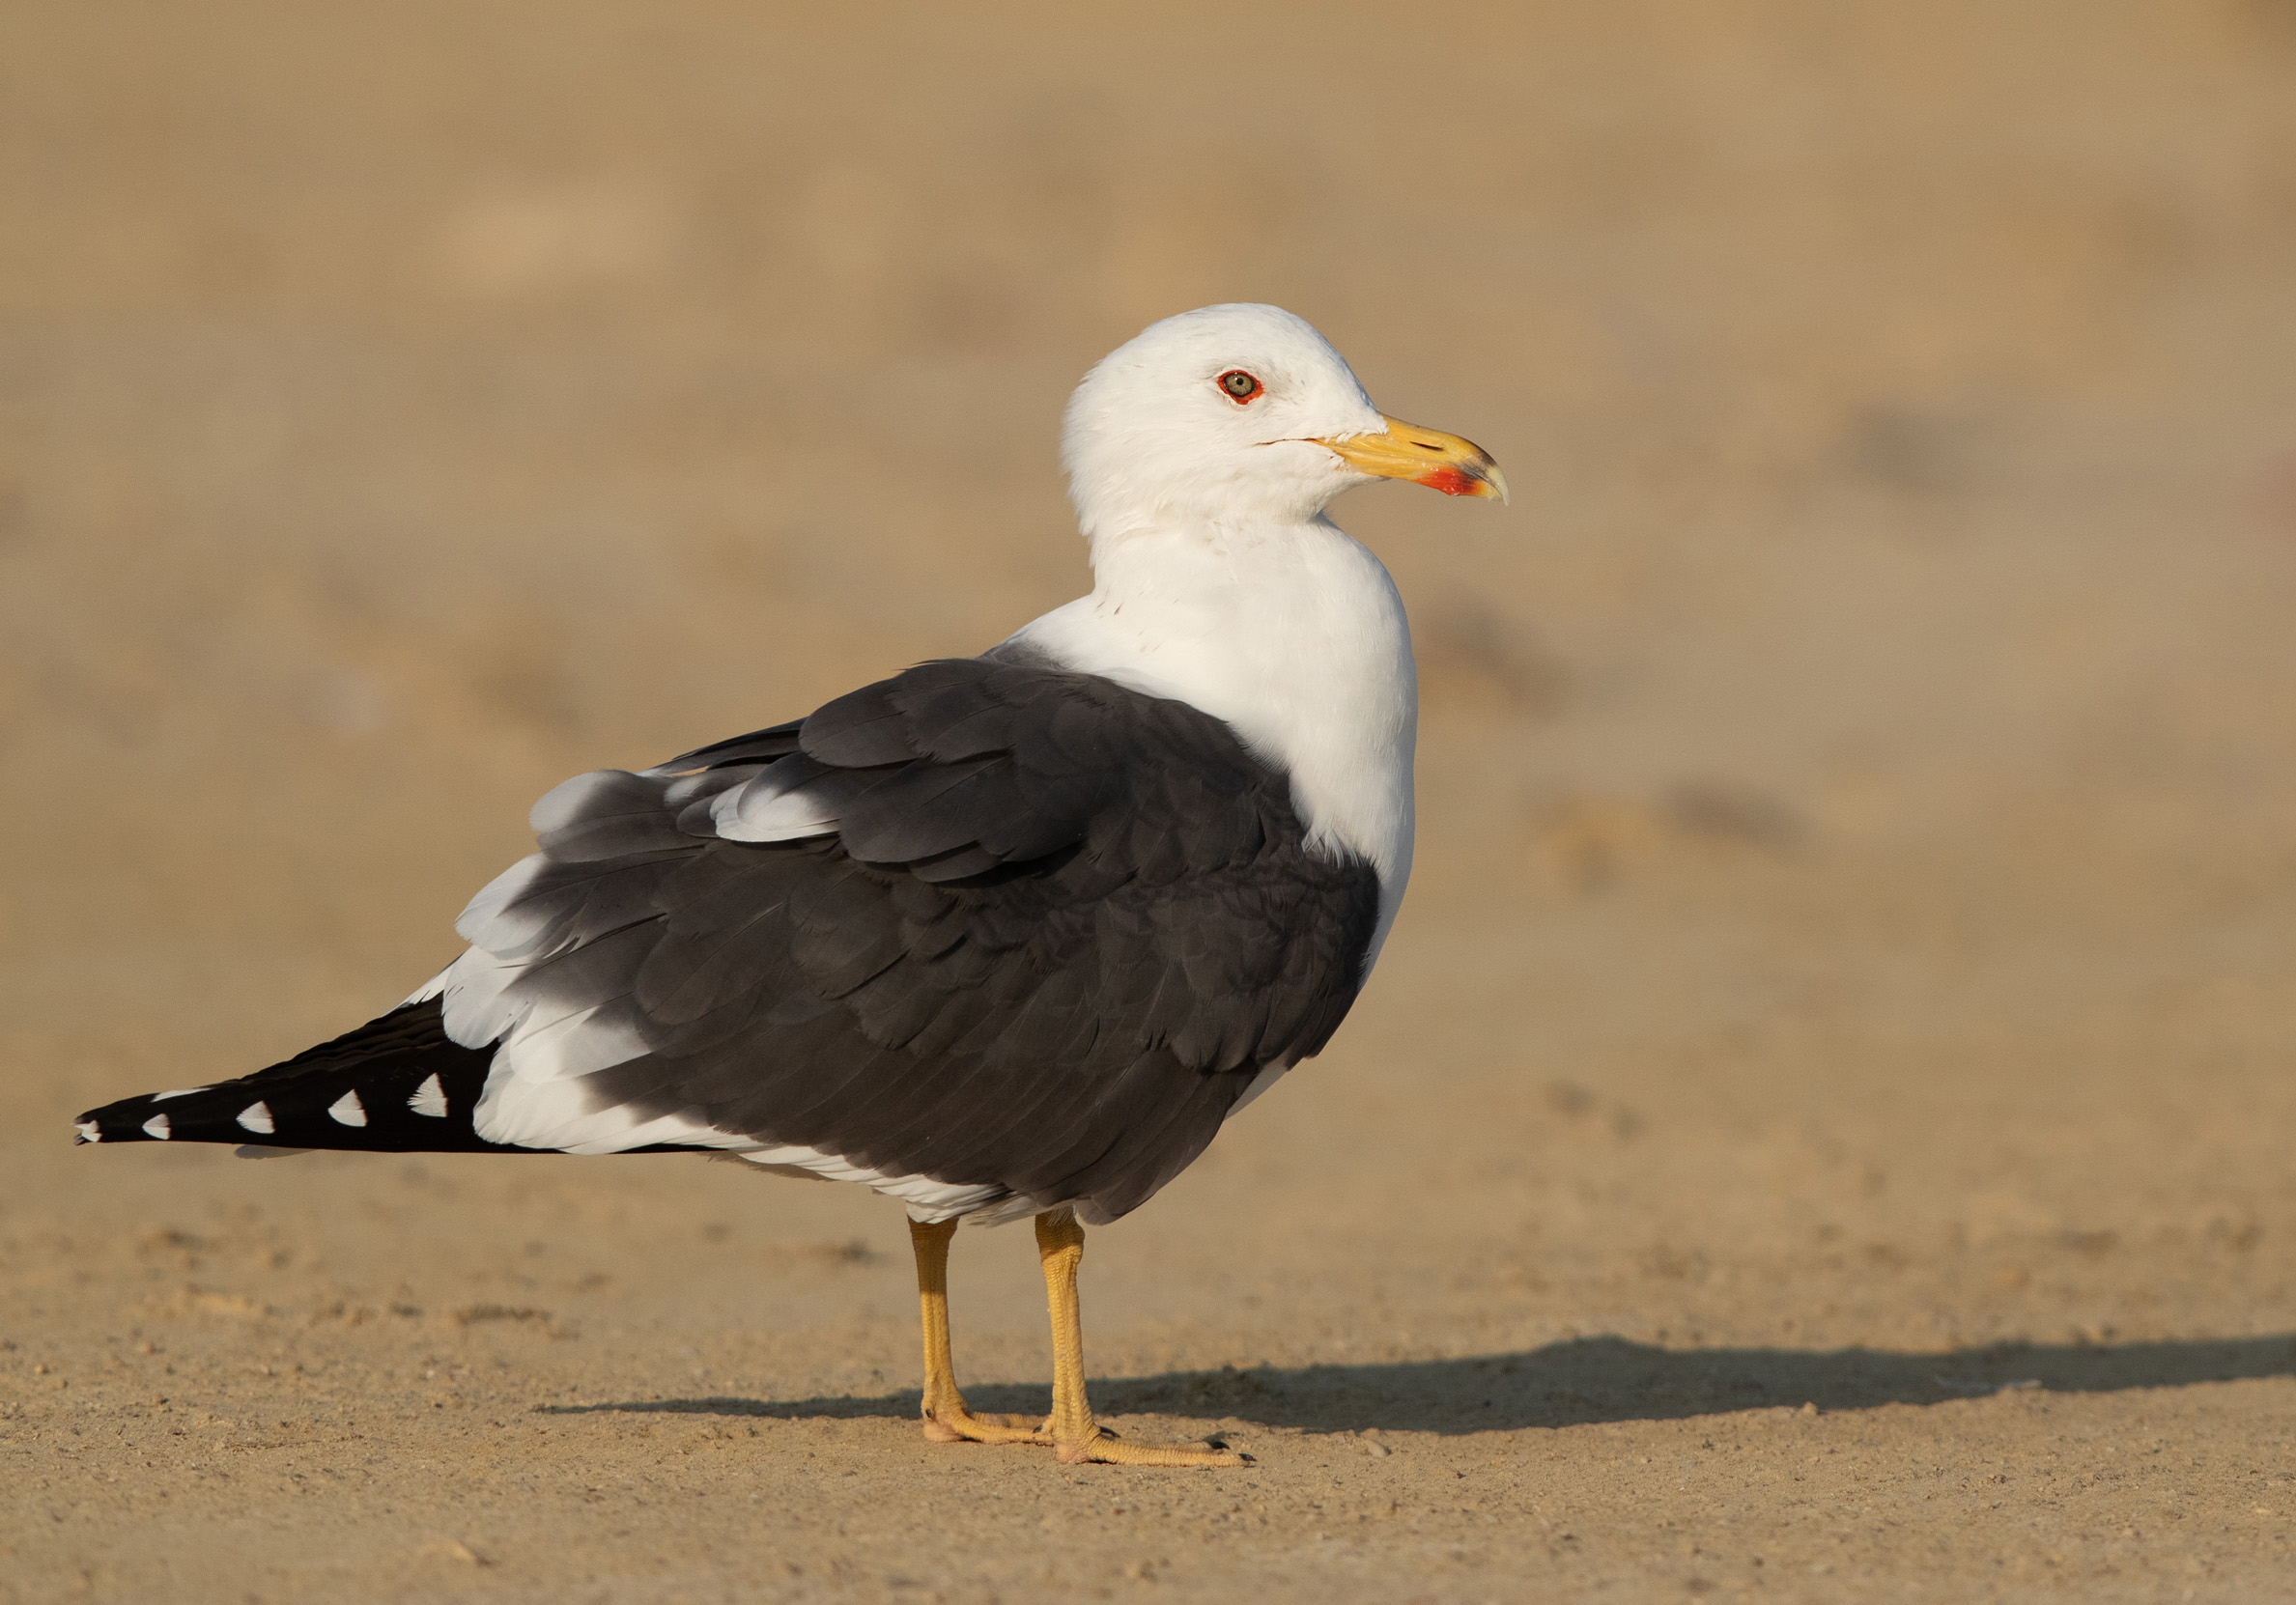 A Lesser Black-backed Gull stood on a sandy floor looking off to the side.